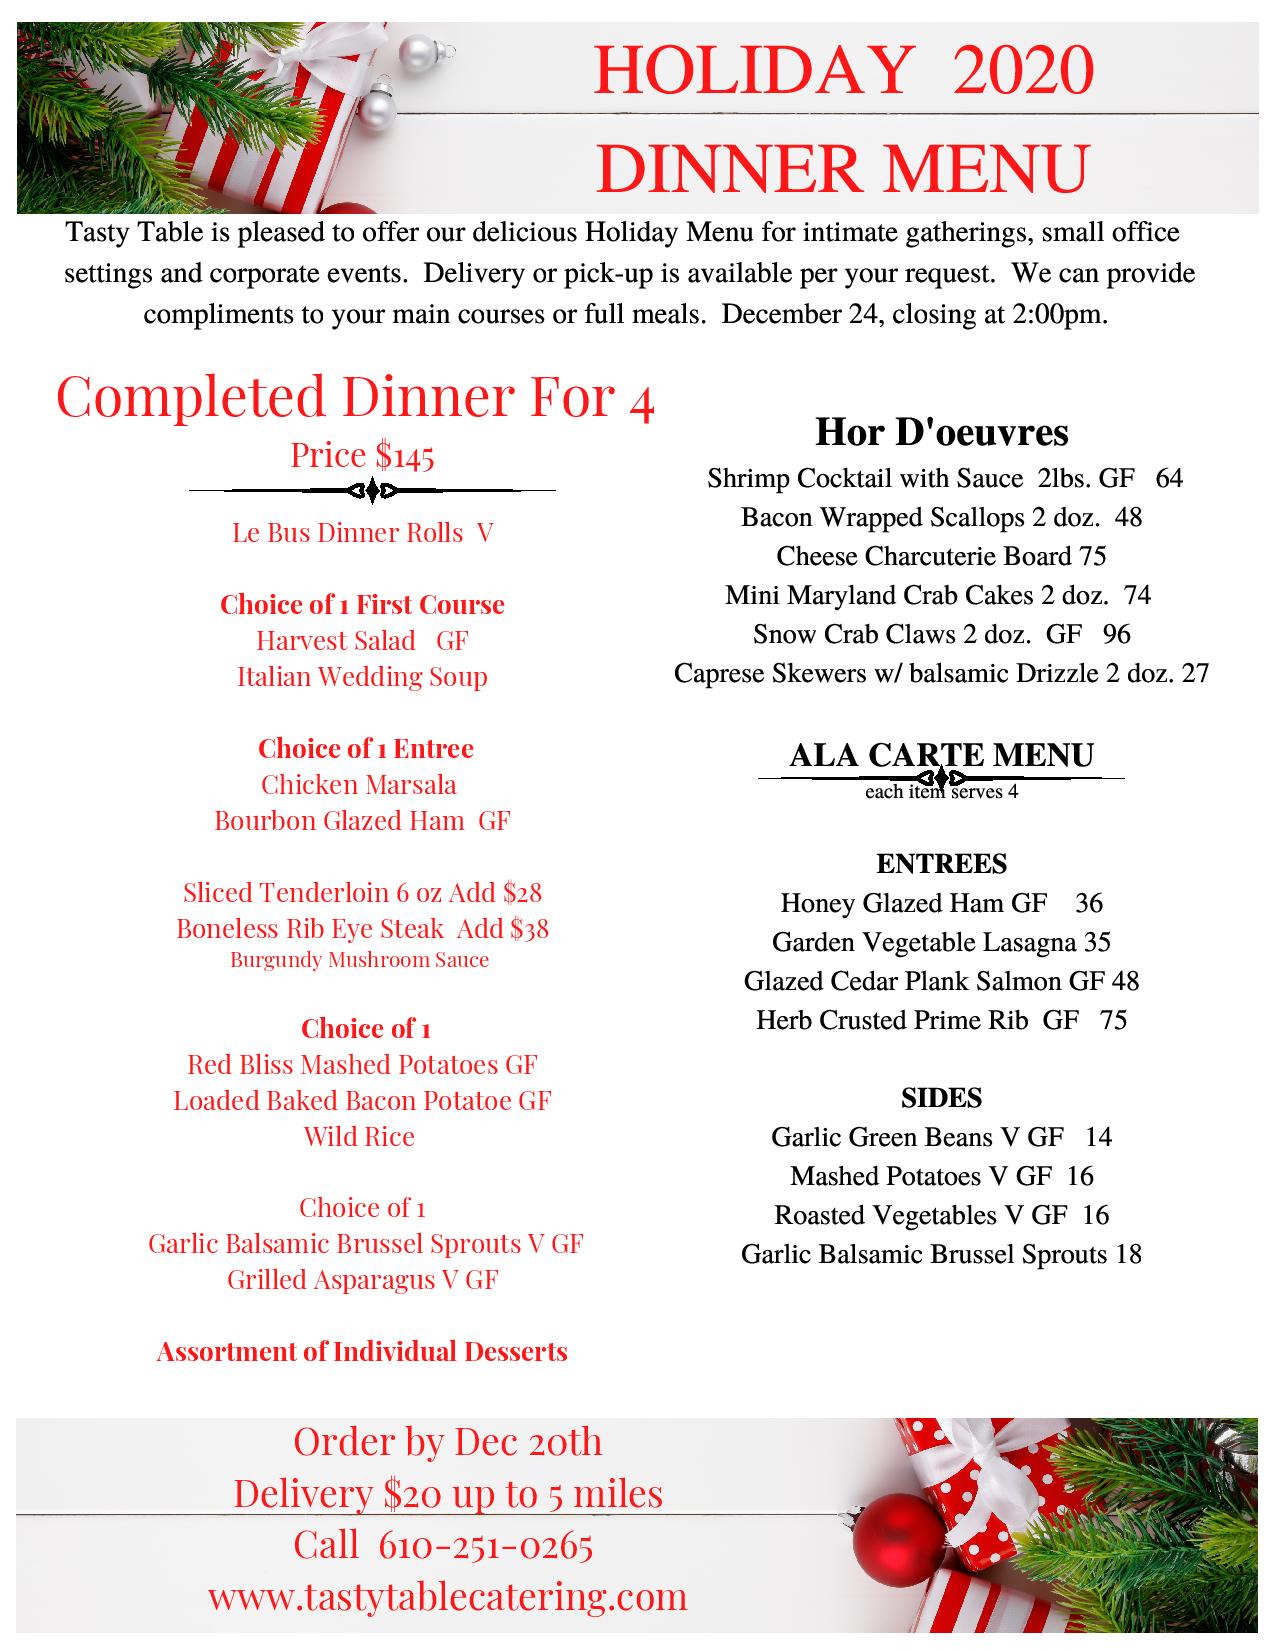 Main Line Holiday Catering Menu - Tasty Table Catering